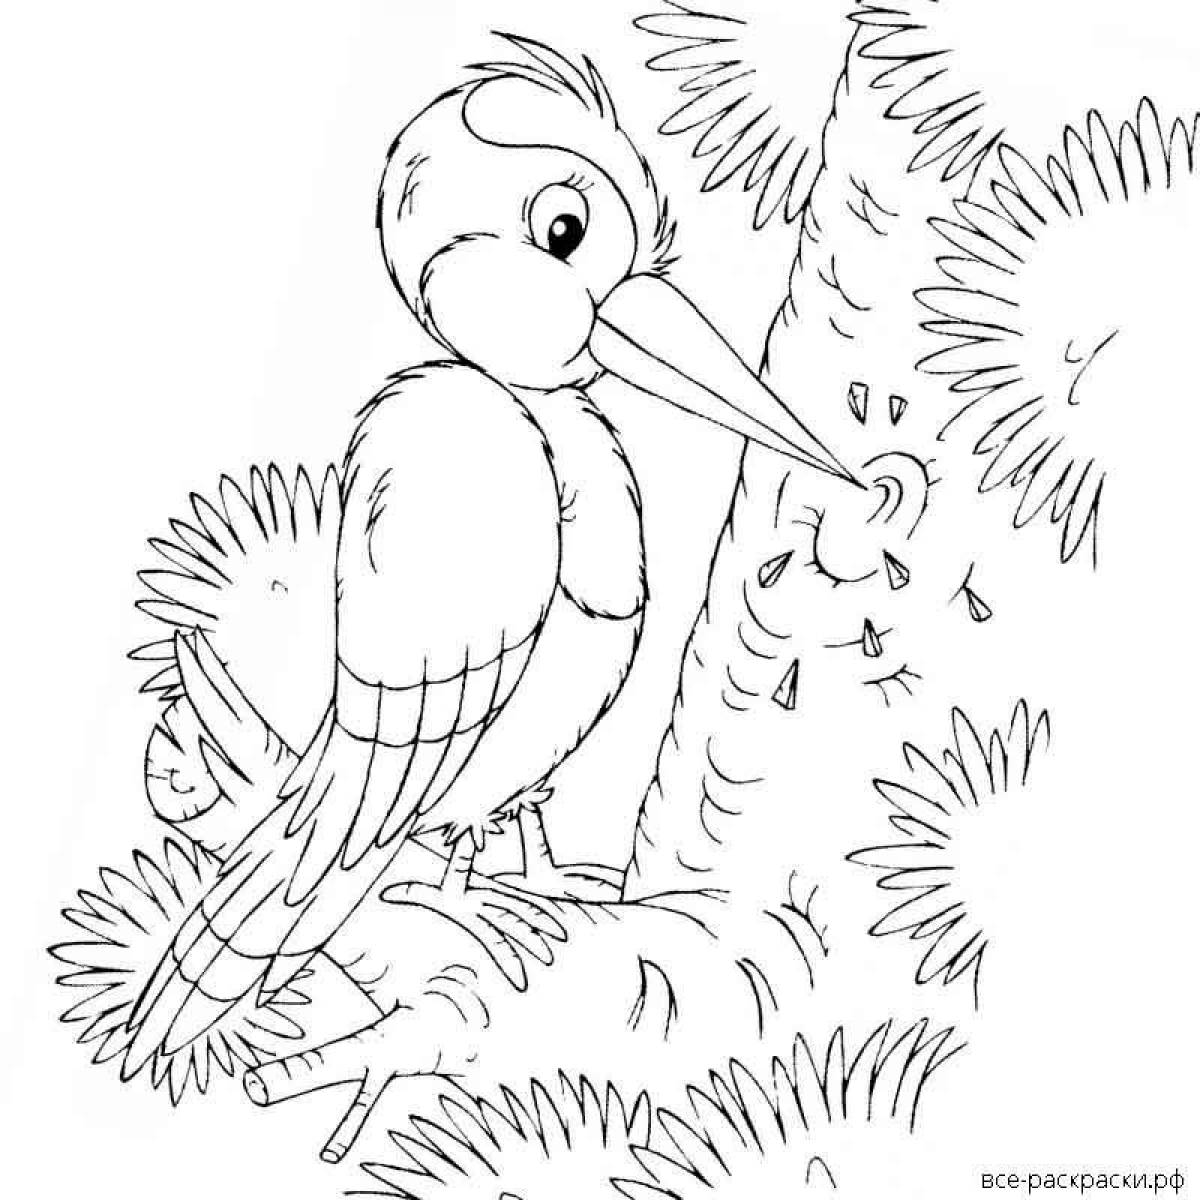 Amusing woodpecker coloring book for kids